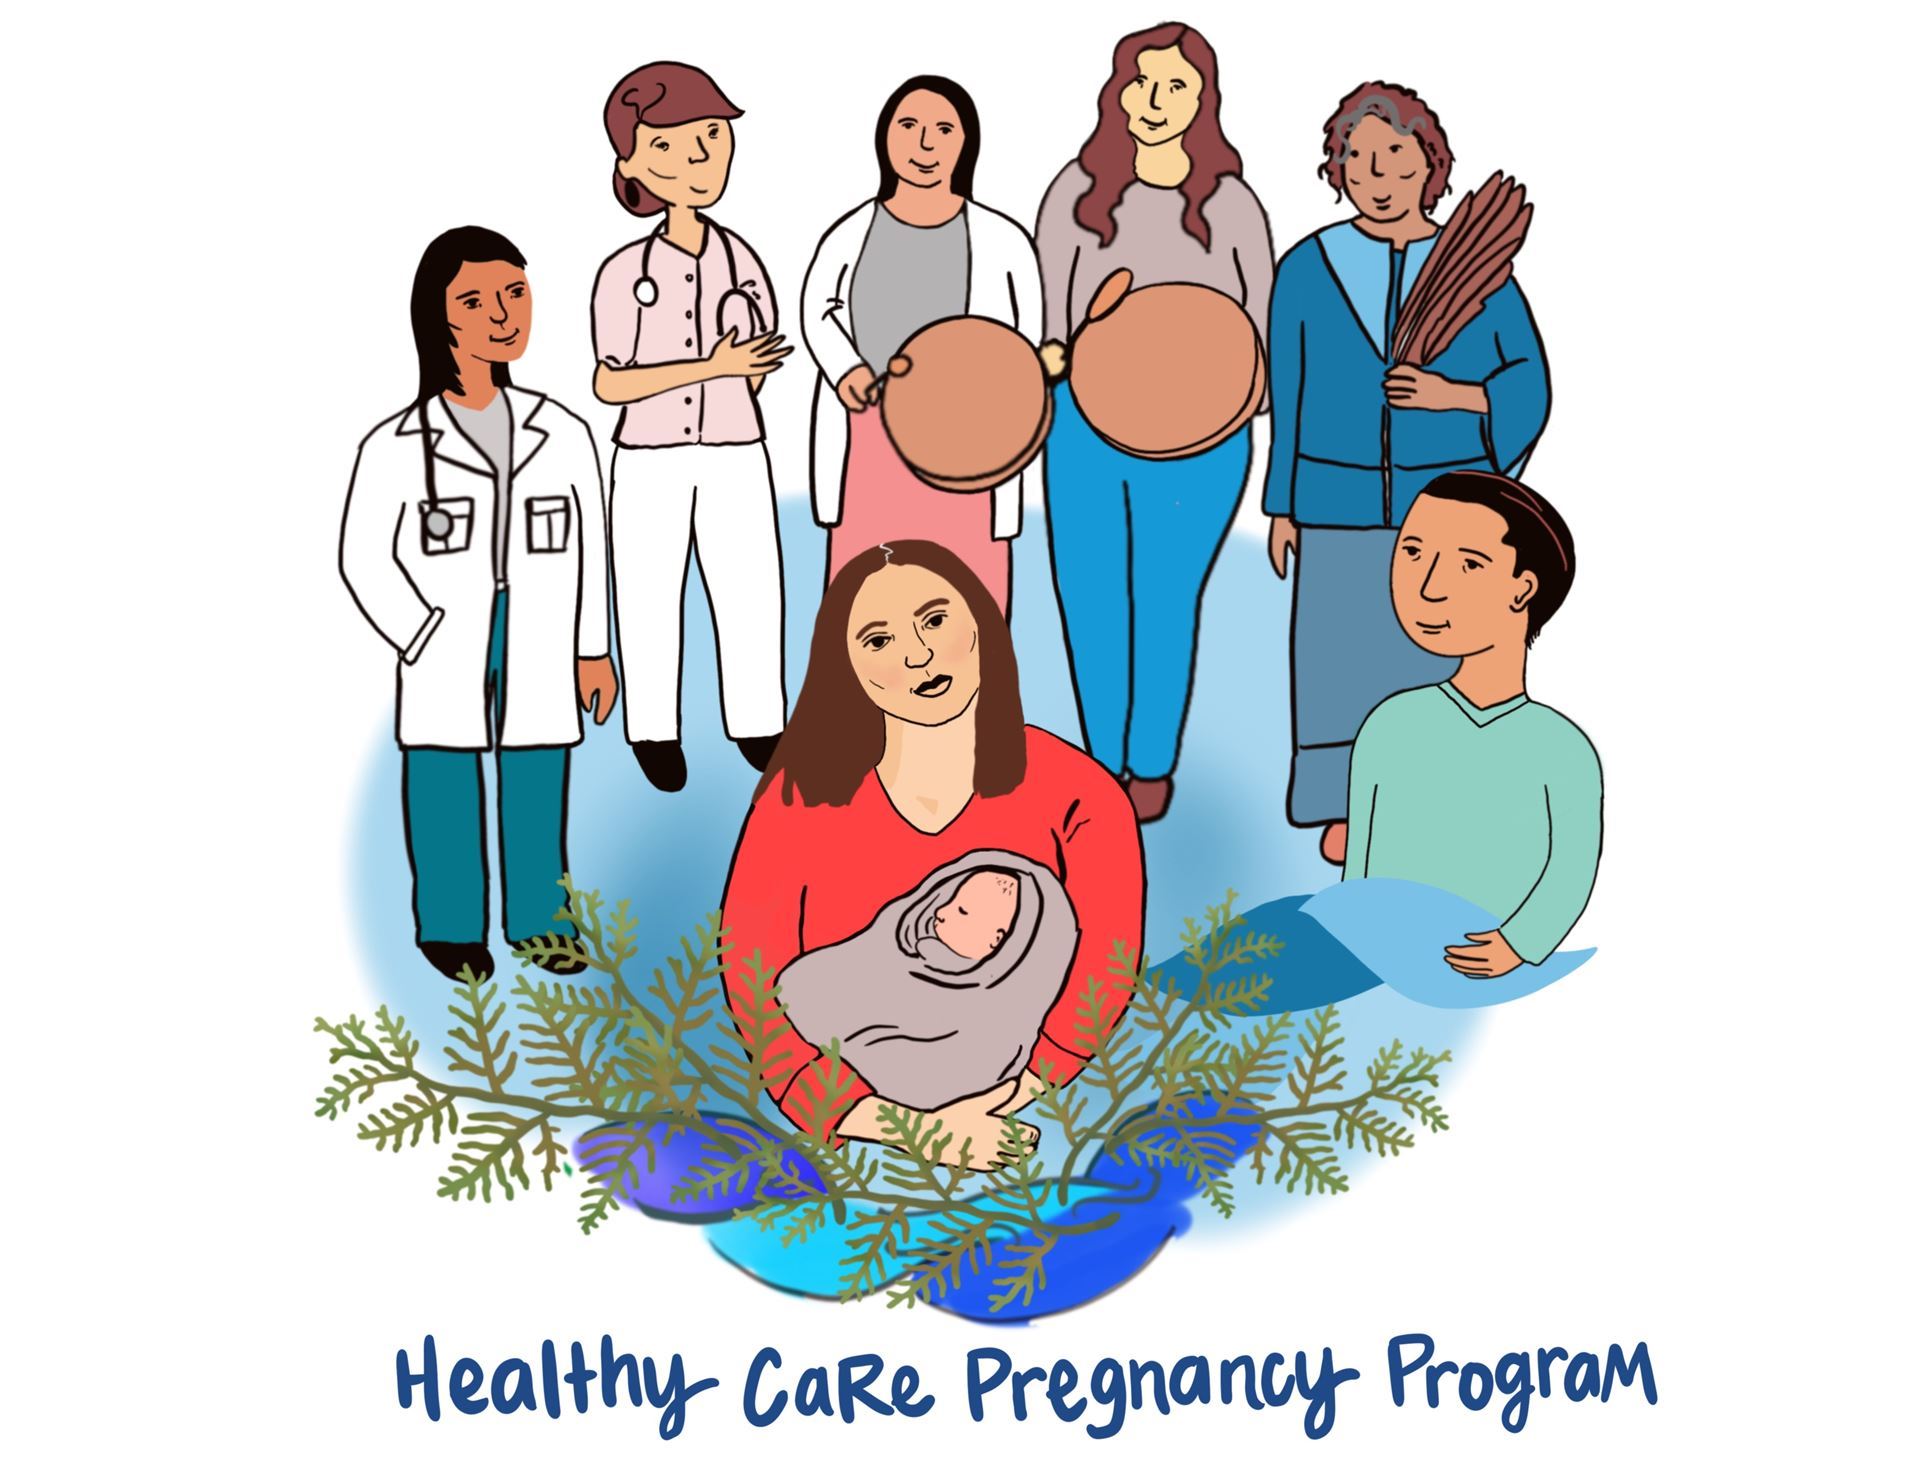 illustrated image of a circle of people in medical professionals, Indigenous Elder, Indigenous people with drums, and a mother holding a young baby, with the wording: healthy care pregnancy program.